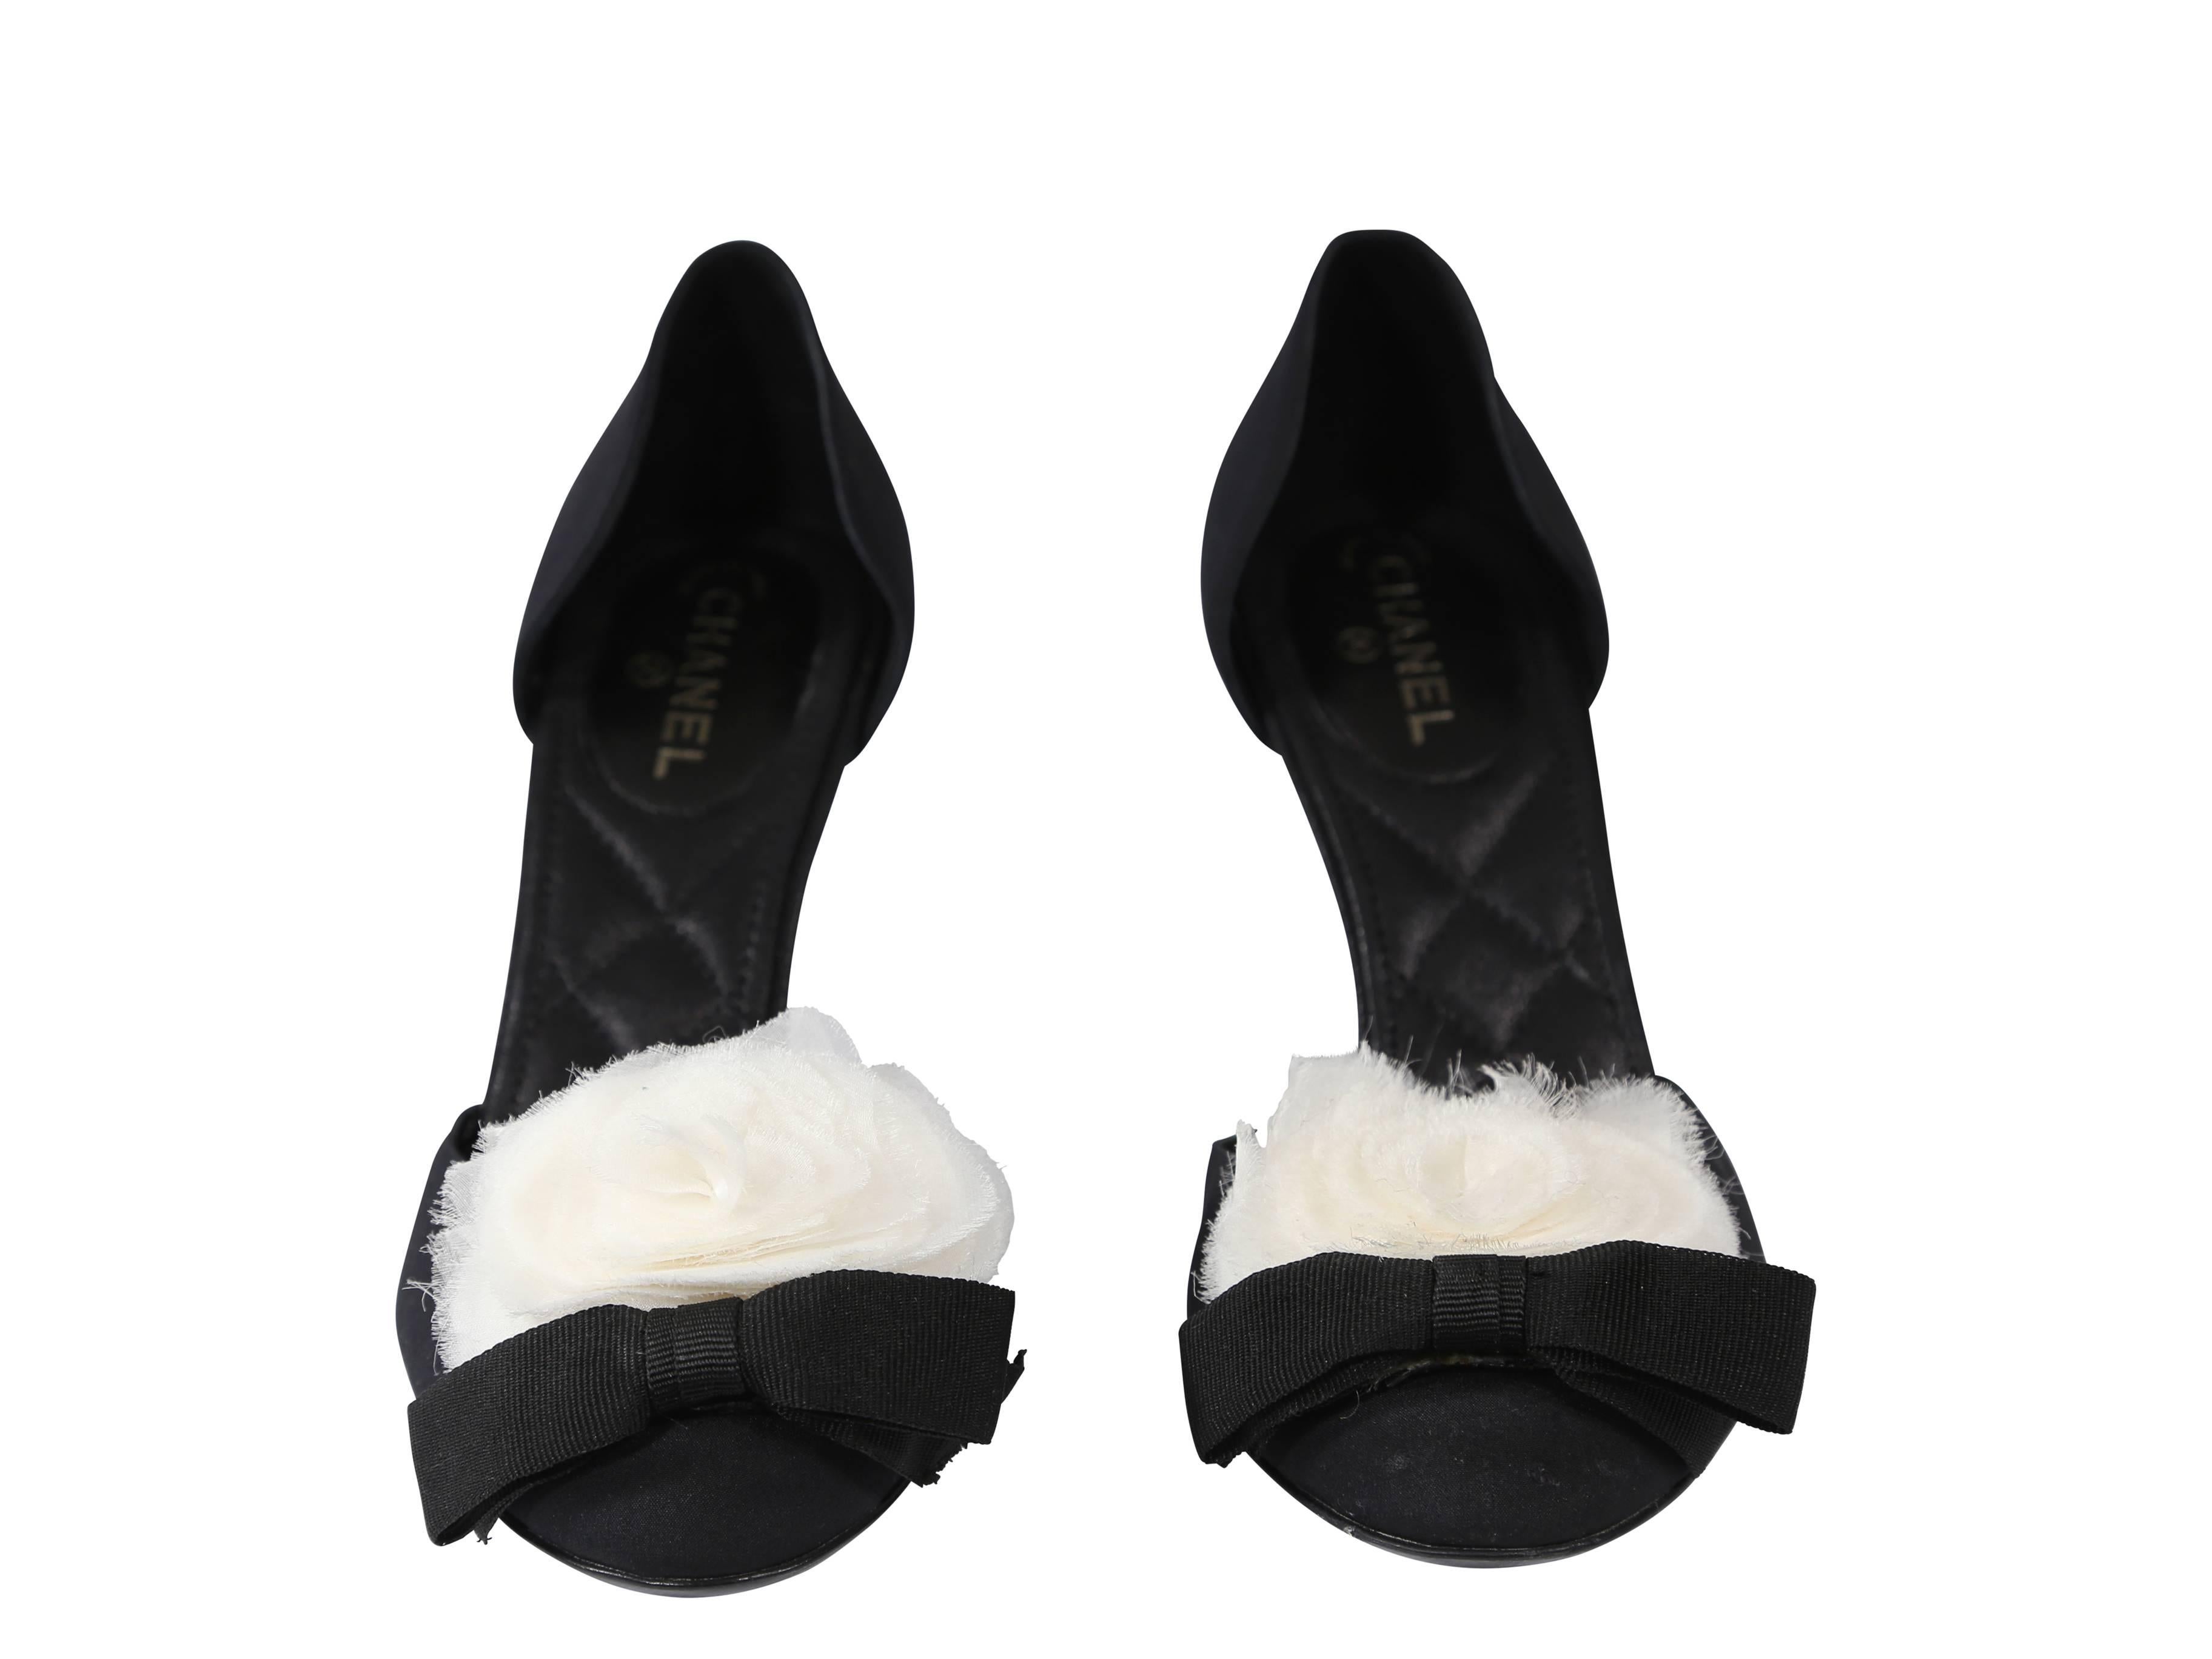 Black Chanel d'Orsay pumps.  White floral applique and black grosgrain ribbon accent round toe.  Slip-on style.